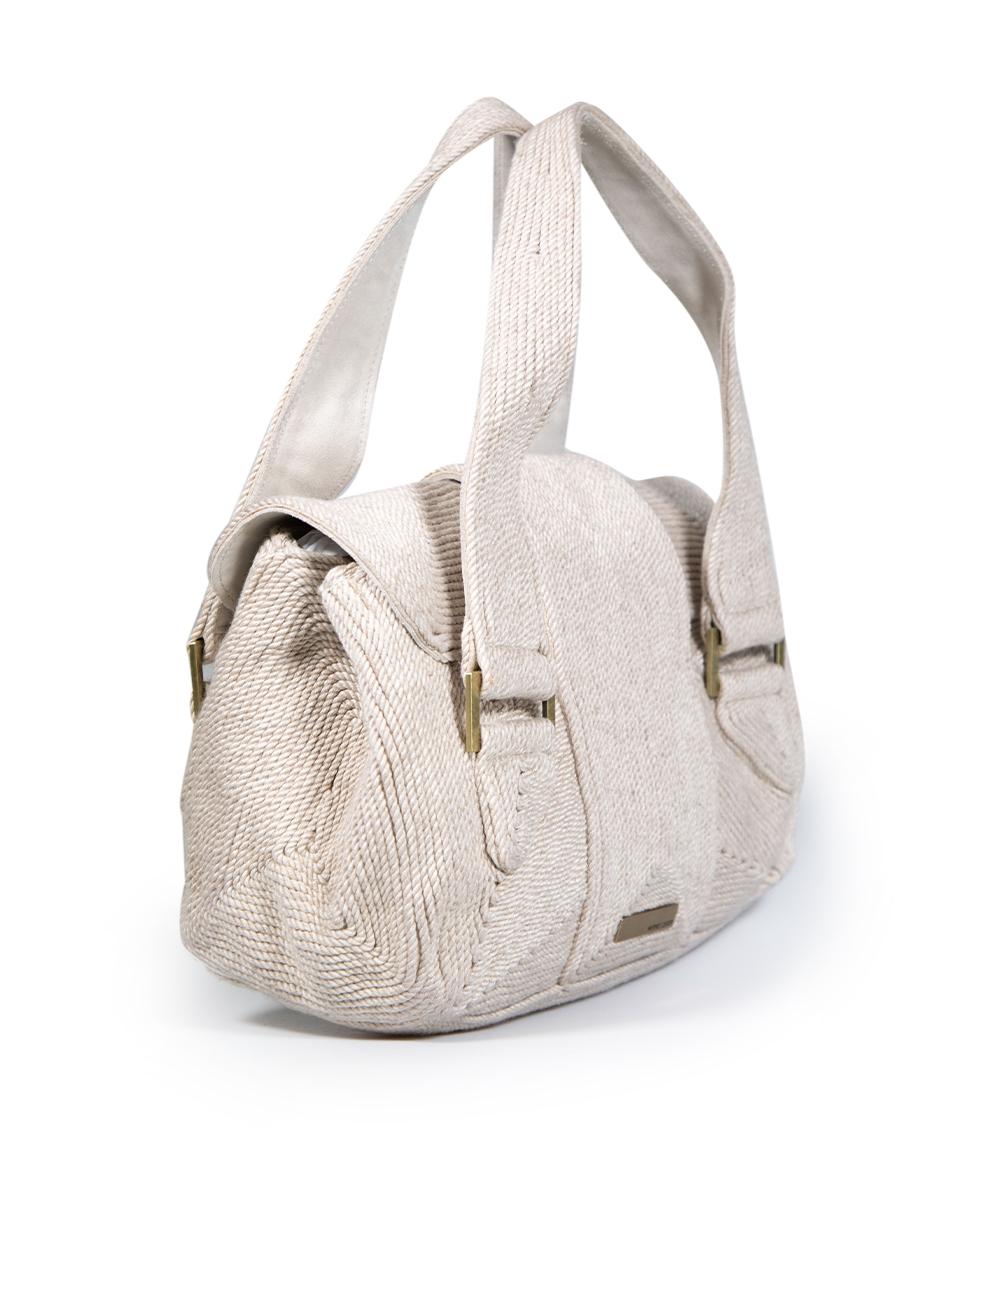 CONDITION is Never worn, with tags. No visible wear to the bag is evident on this new Herve Leger designer resale item. This item comes with an original dust bag.
 
 
 
 Details
 
 
 Beige
 
 Cloth
 
 Medium handbag
 
 2x Top handles
 
 Flap with